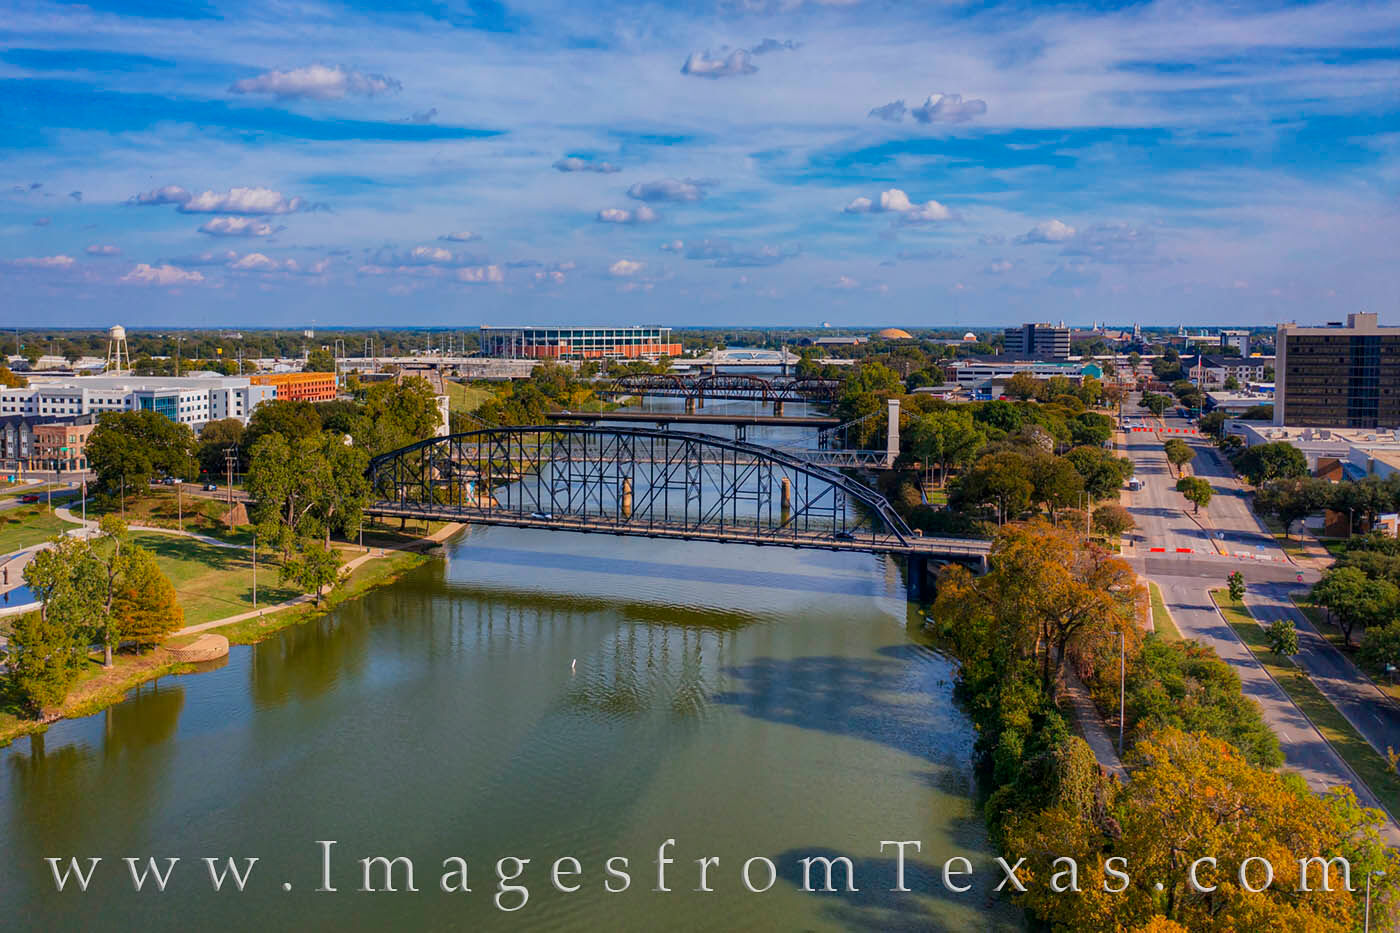 The Brazos River flows north of downtown Waco. Several old bridges connect the Riverwalk, including the Washington Avenue Bridge...